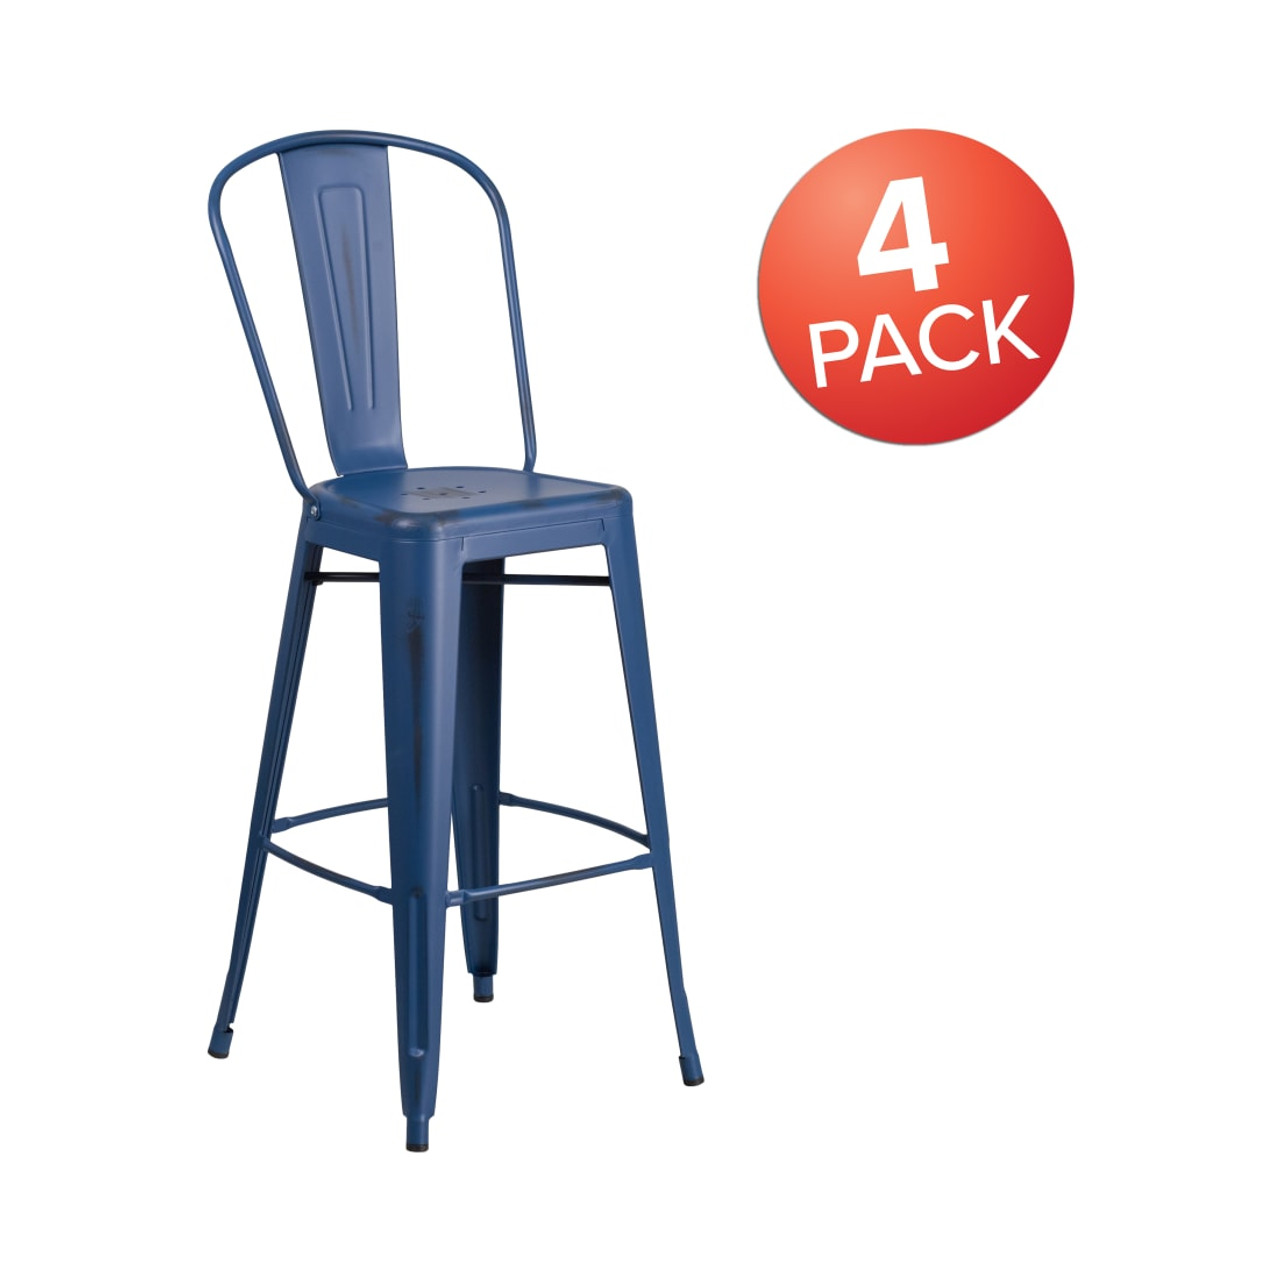 4 Pack 30" High Distressed Antique Blue Metal Indoor-Outdoor Barstool with Back